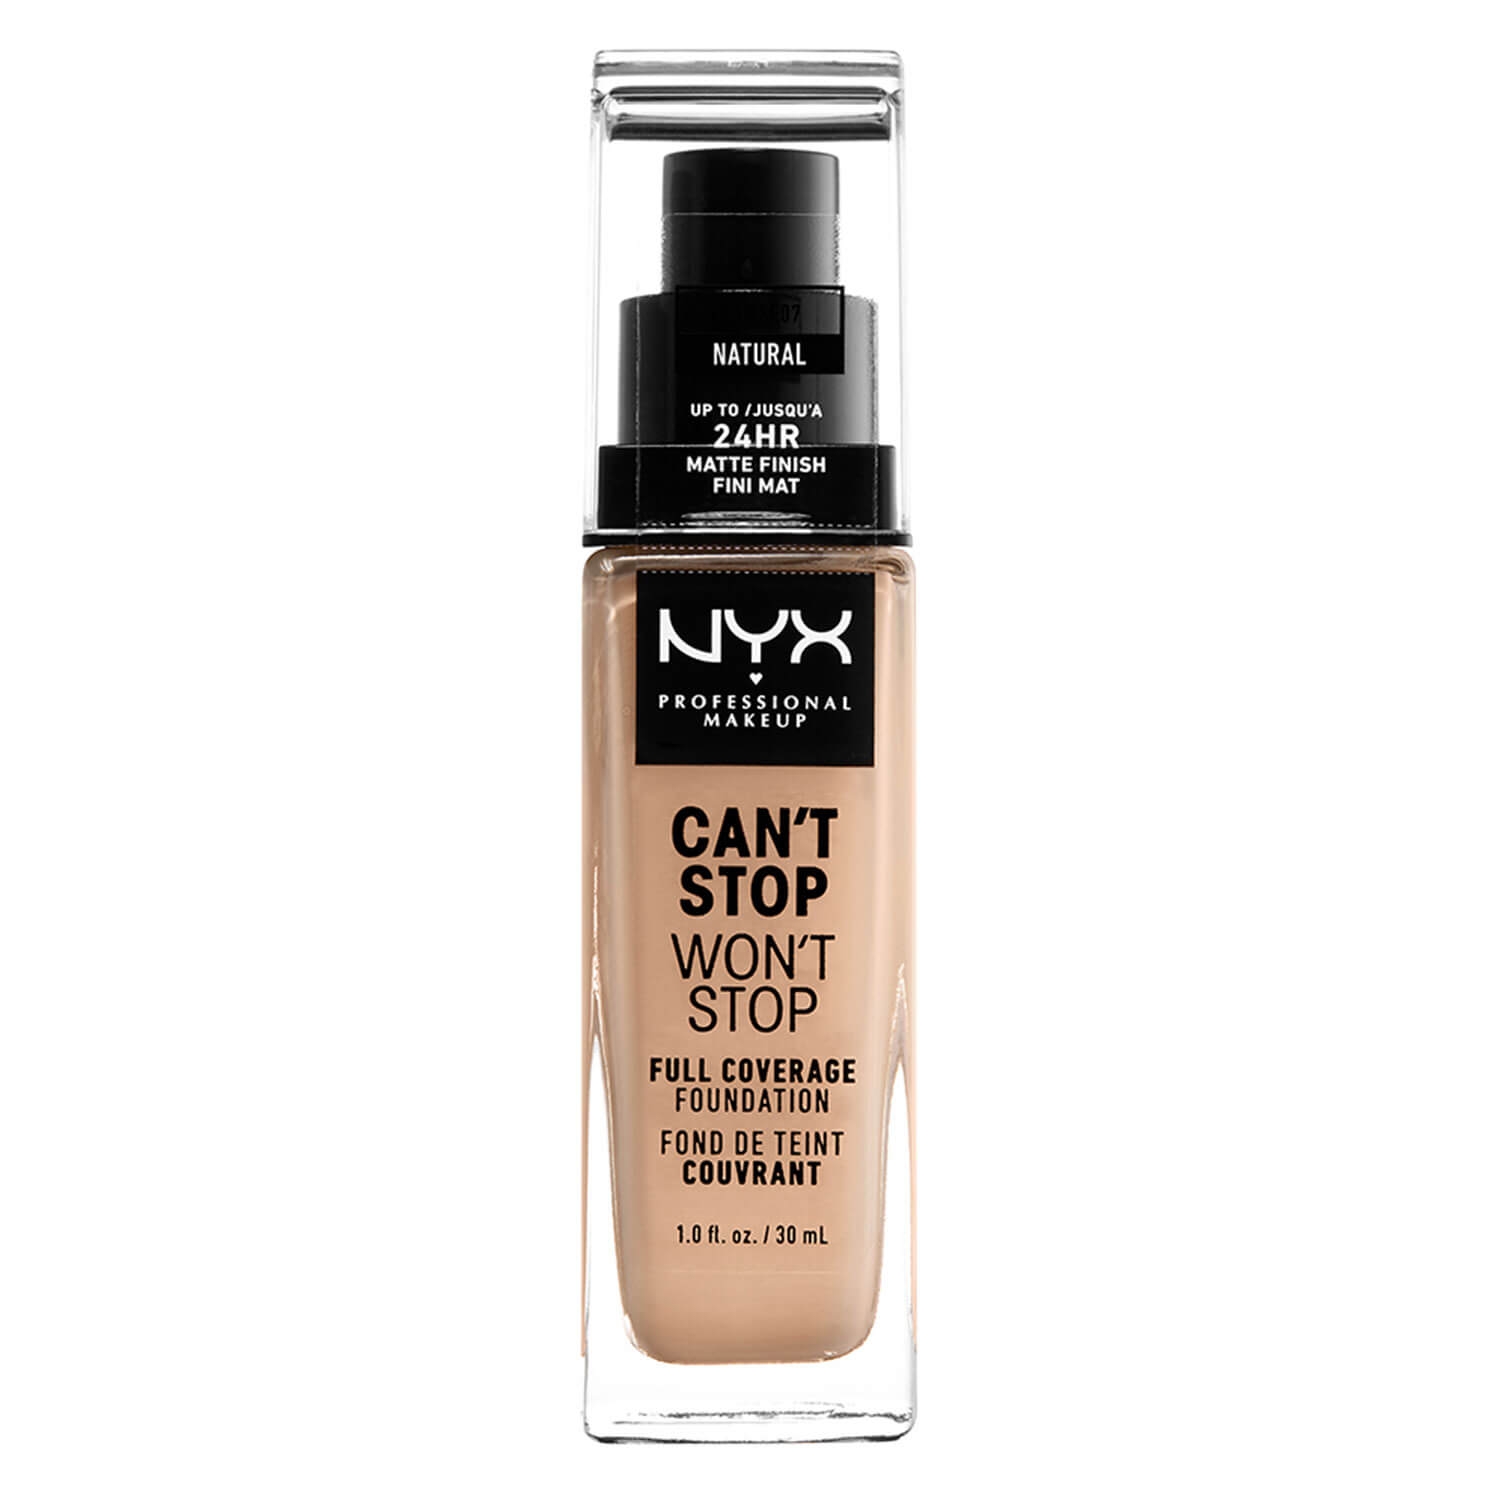 Produktbild von Can't Stop Won't Stop - Full Coverage Foundation Natural